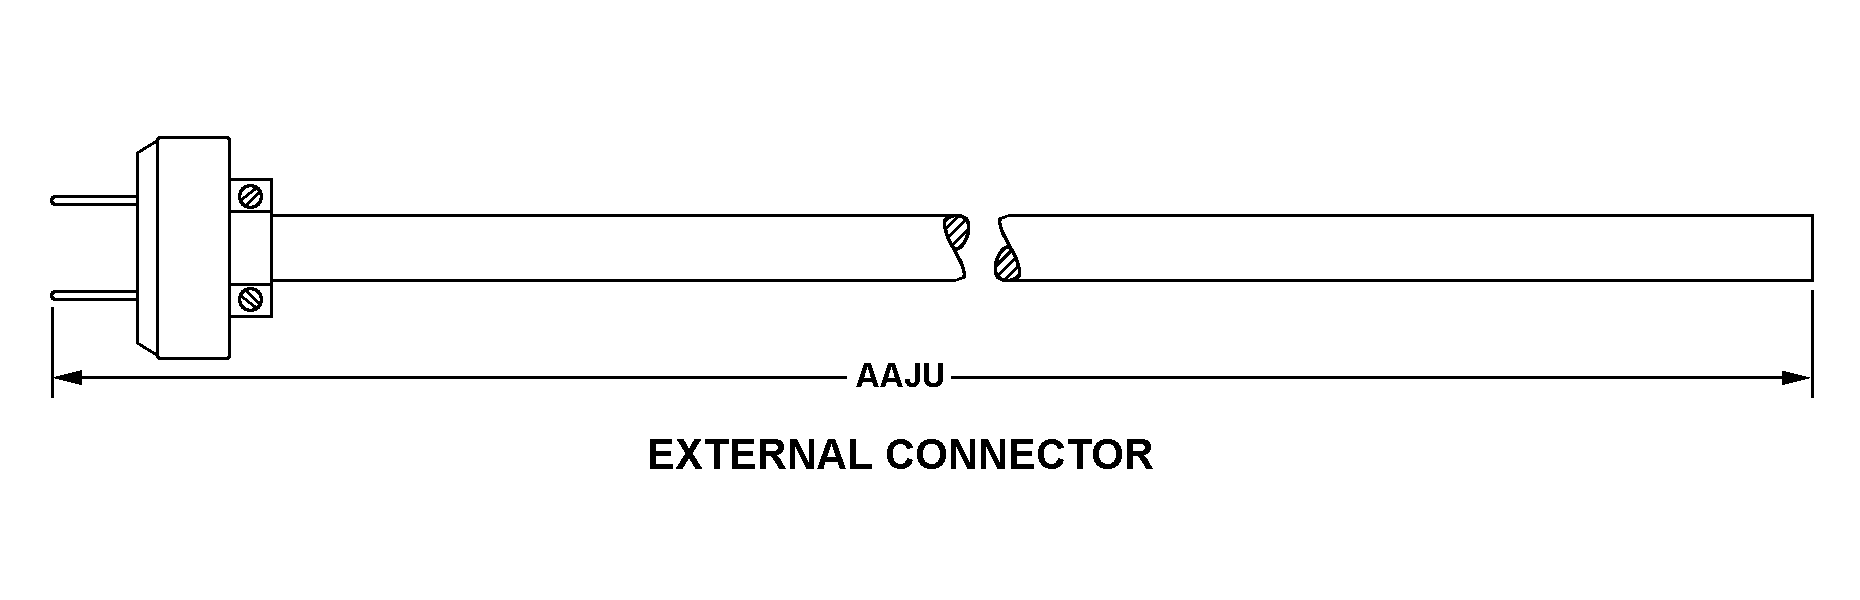 EXTERNAL CONNECTOR style nsn 5995-01-359-1441